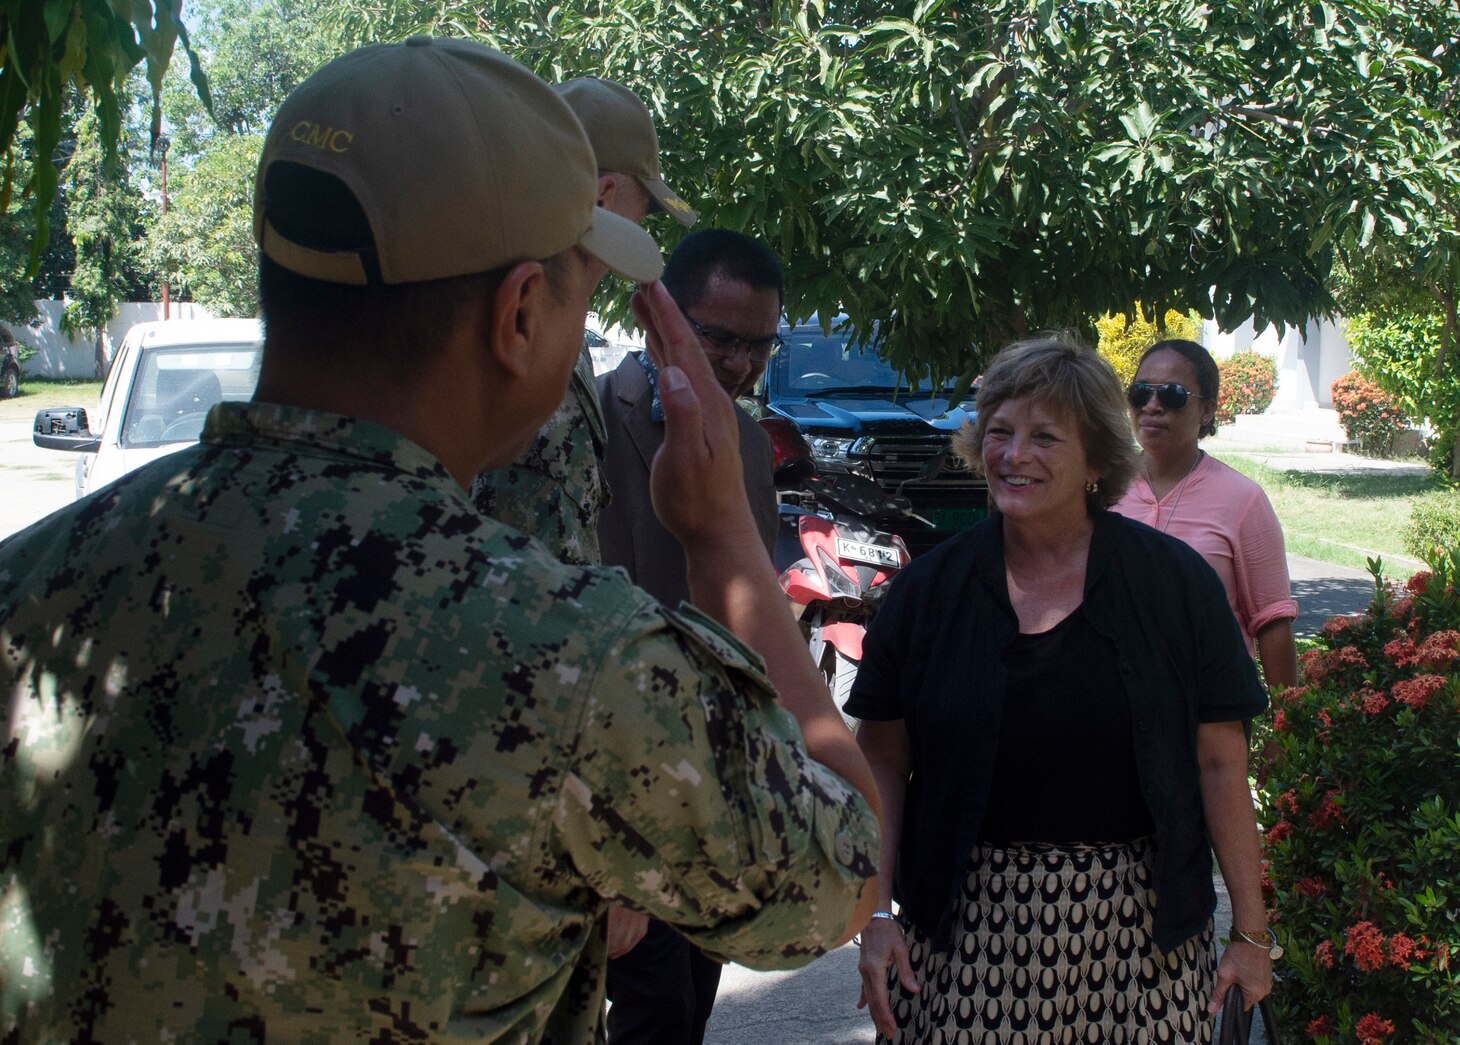 DILI, Timor-Leste (April 24, 2019) – Kathleen Fitzpatrick, U.S. ambassador to Timor-Leste, arrives at the Timor-Leste National Institute of Health to attend a ground-breaking ceremony. The event marks the start of construction on the facility that will be used to help train Timorese medical professionals in emergency medical response techniques. Pacific Partnership, now in its 14th iteration, is the largest annual multinational humanitarian assistance and disaster relief preparedness mission conducted in the Indo-Pacific. Each year the mission team works collectively with host and partner nations to enhance regional interoperability and disaster response capabilities, increase security and stability in the region, and foster new and enduring friendships in the Indo-Pacific.